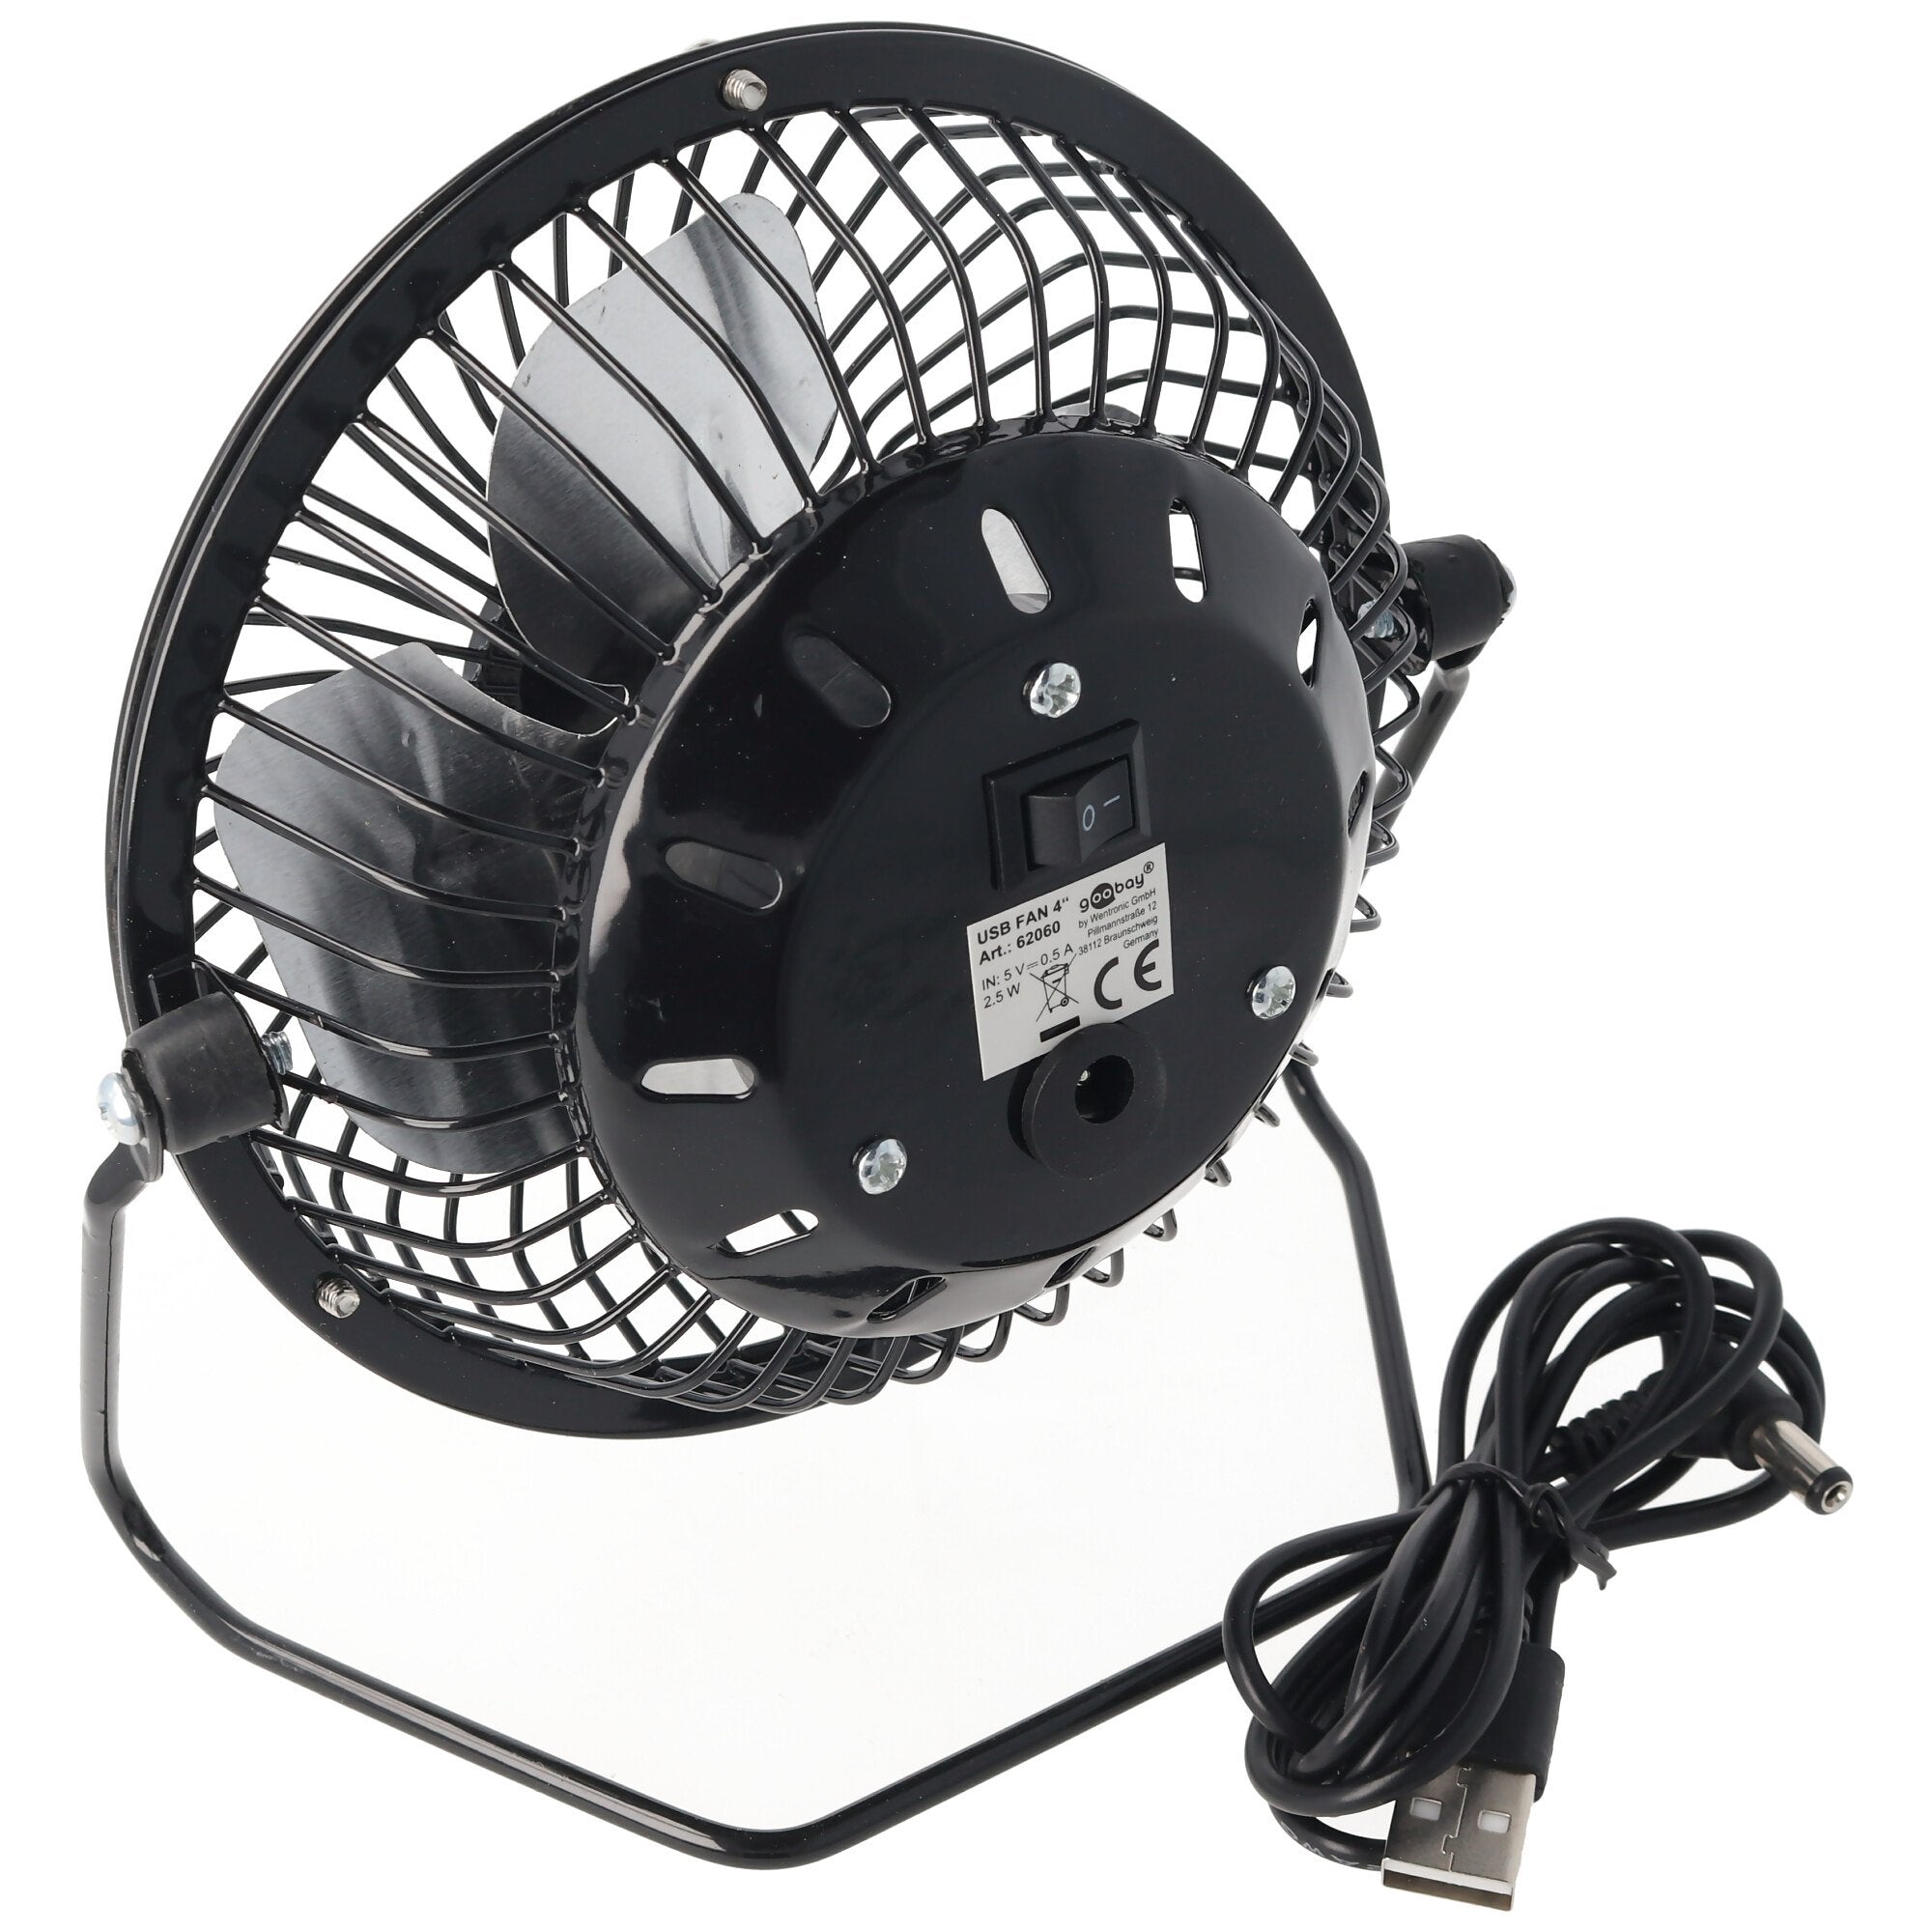 USB fan 4 inch for the desk with ON / OFF switch, black